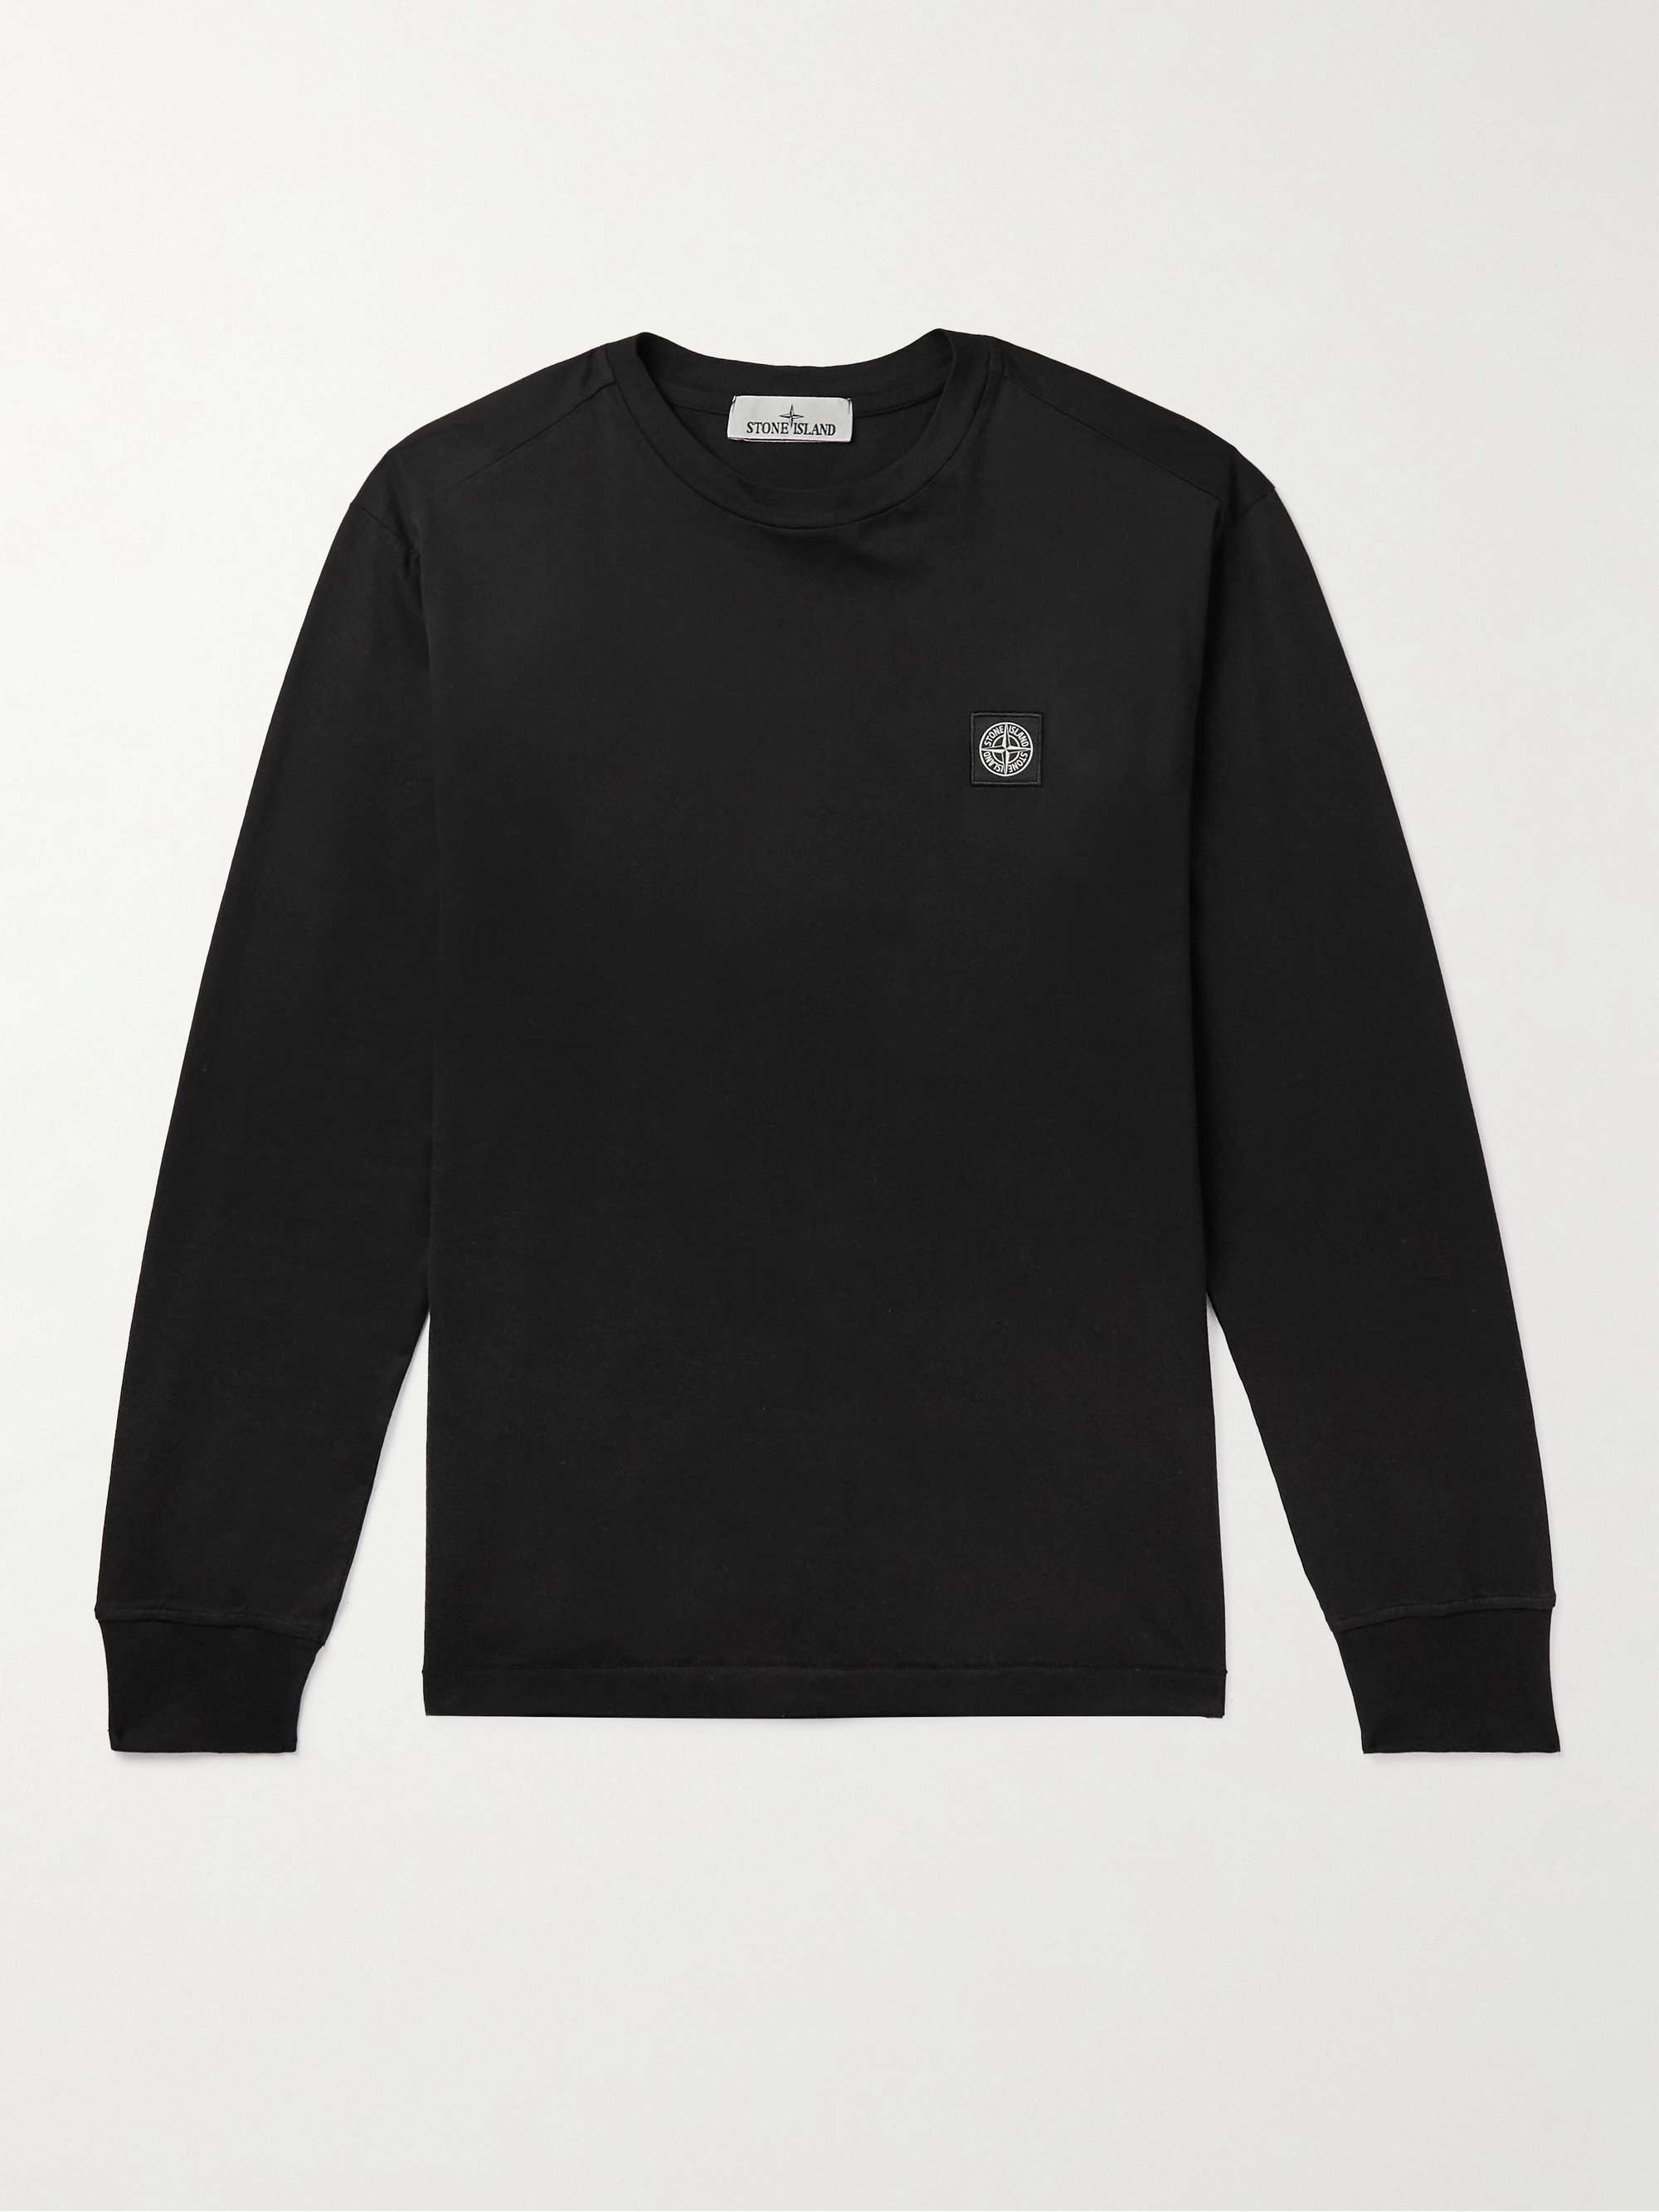 STONE ISLAND Logo-Embroidered Garment-Dyed Cotton-Jersey T-Shirt,Black